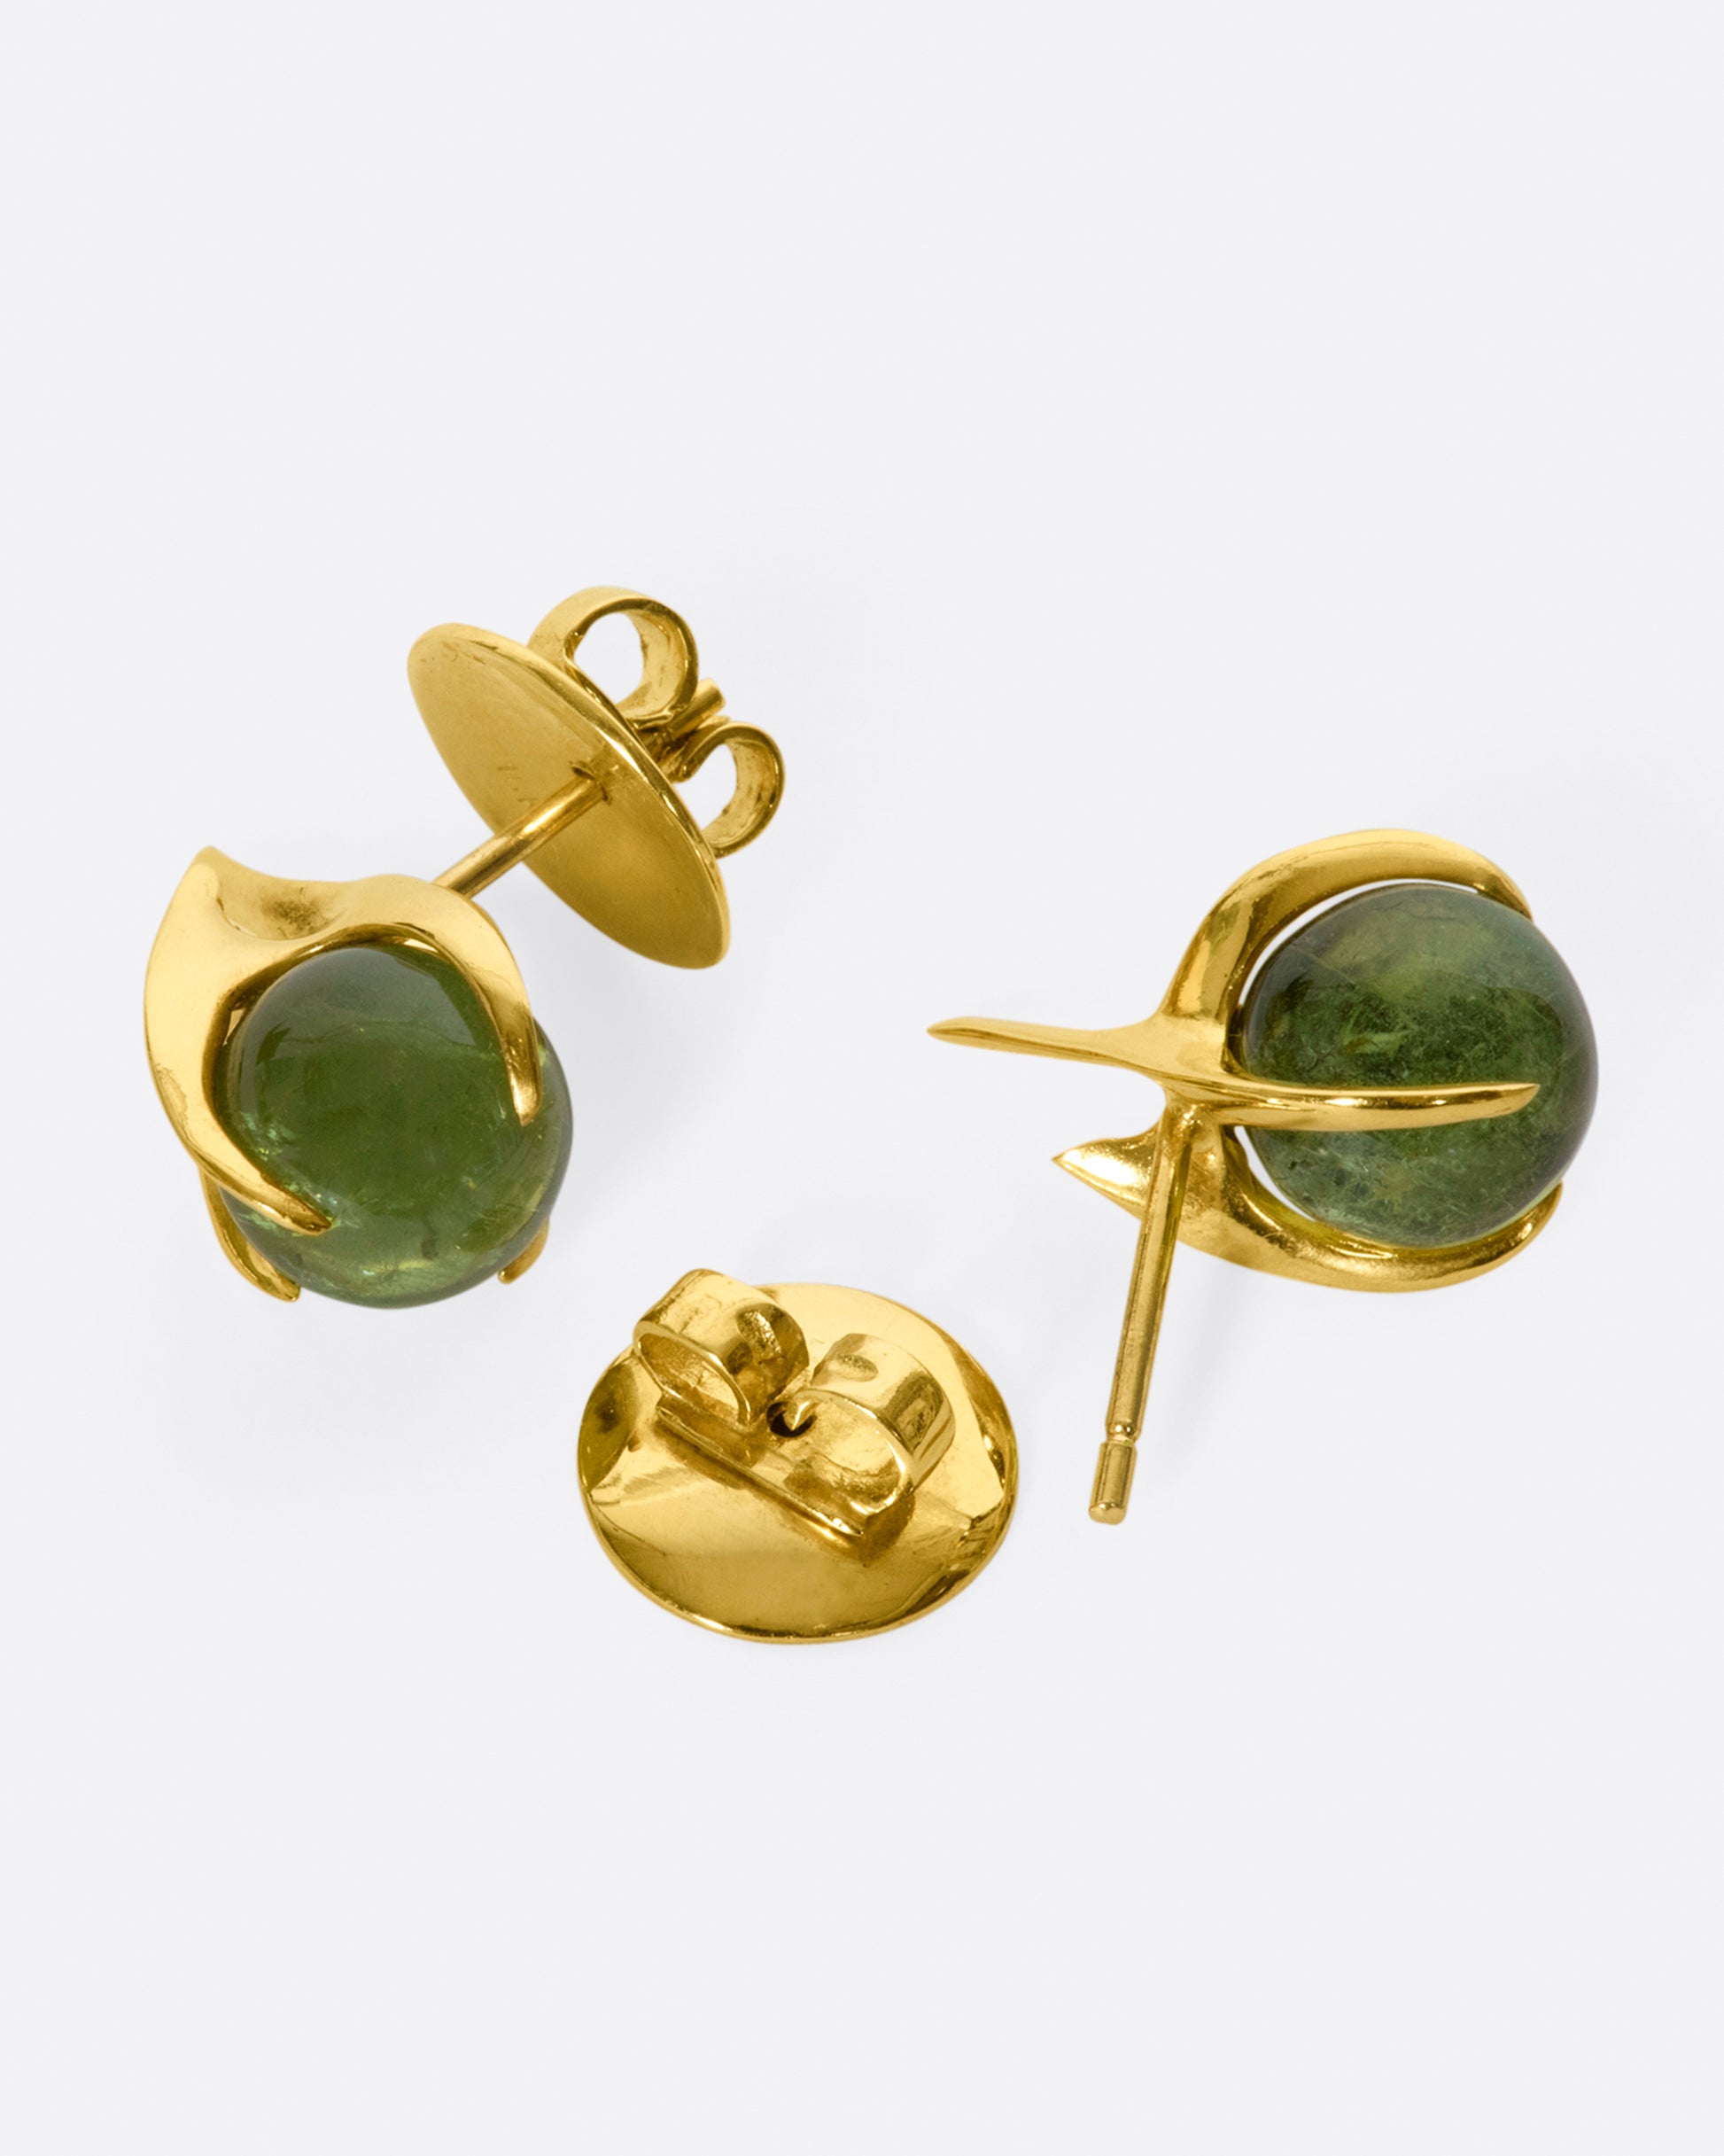 A pair of yellow gold stud earrings with green tourmaline spheres set in flame-like settings, shown from the side.